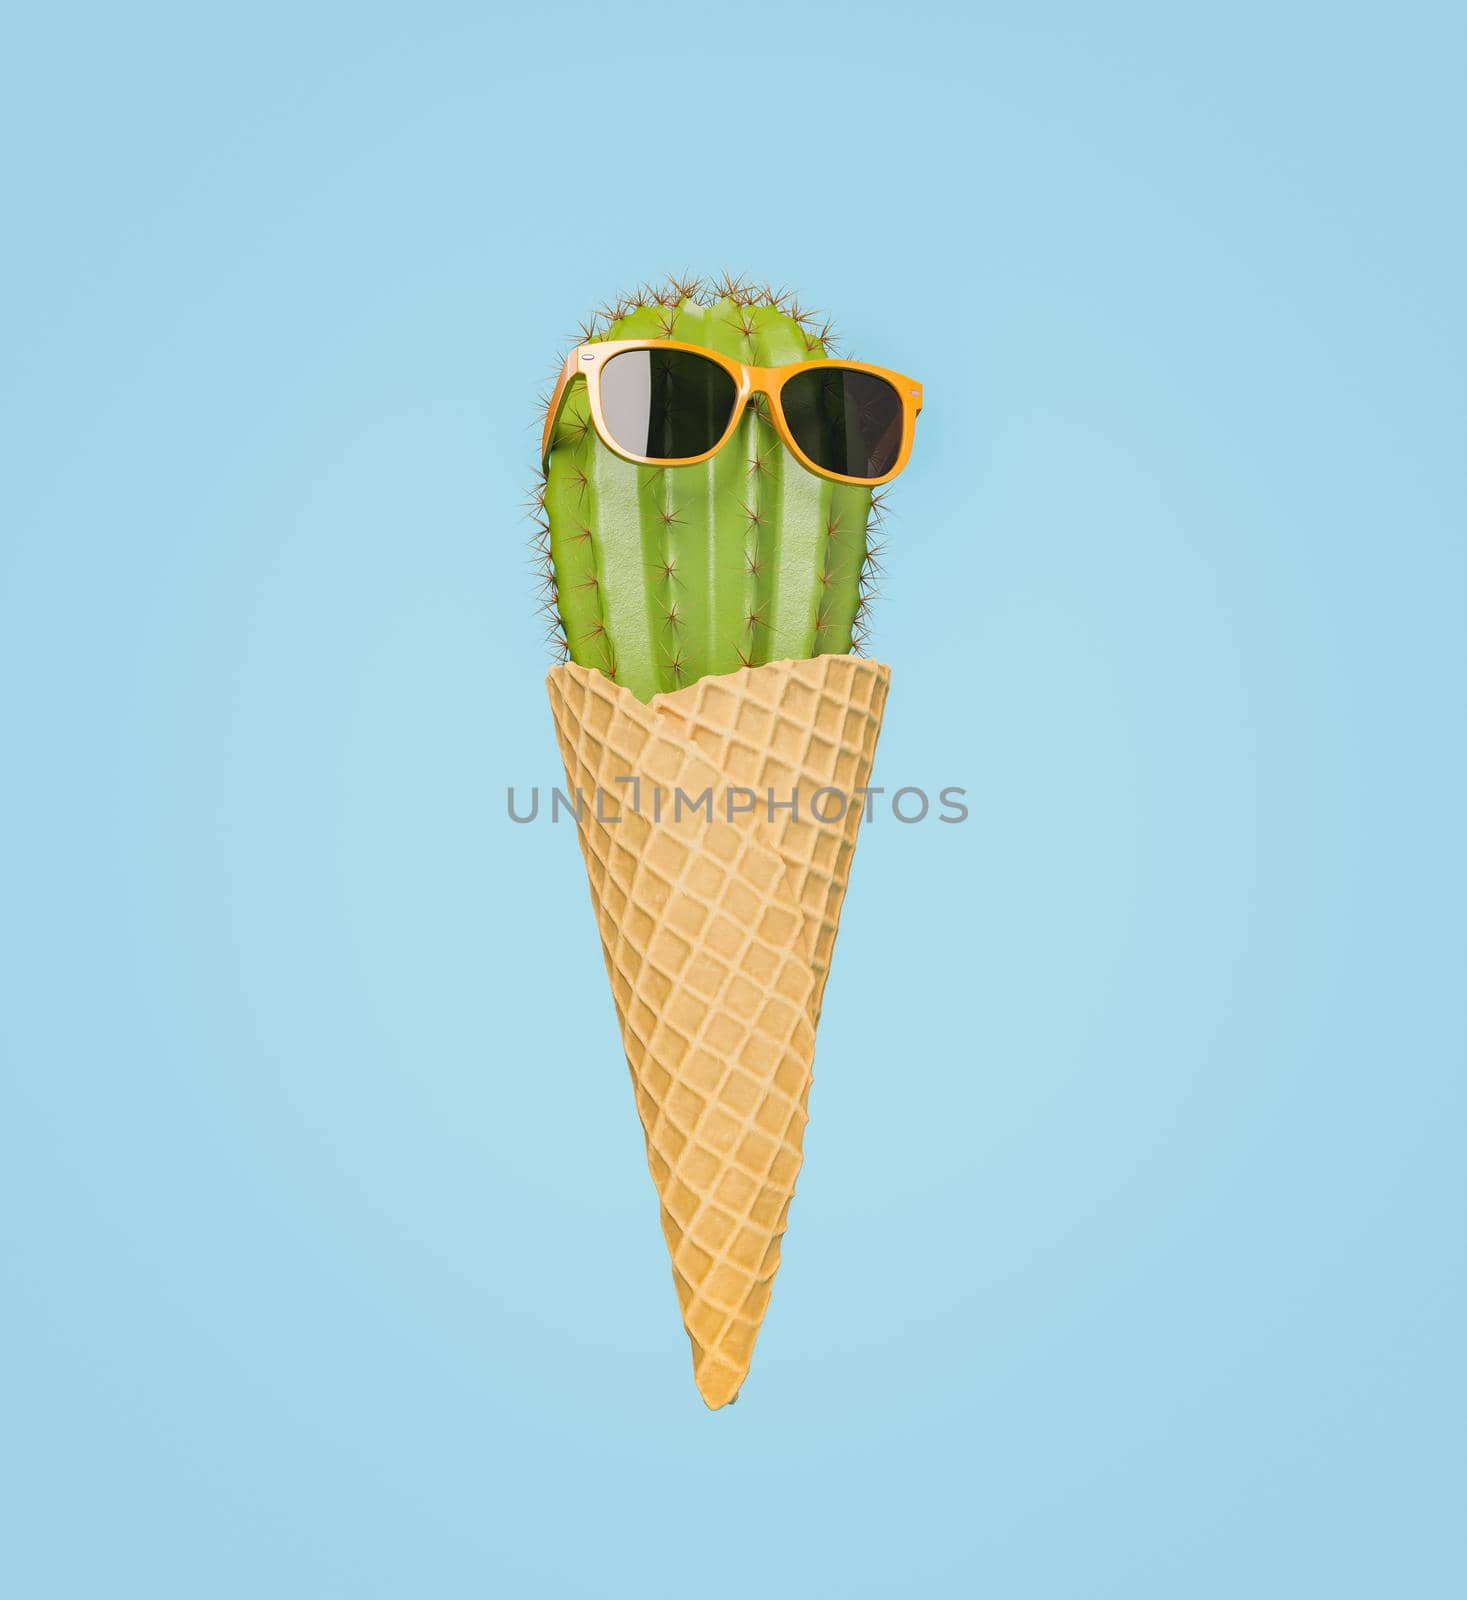 ice cream cone with a cactus with sunglasses by asolano